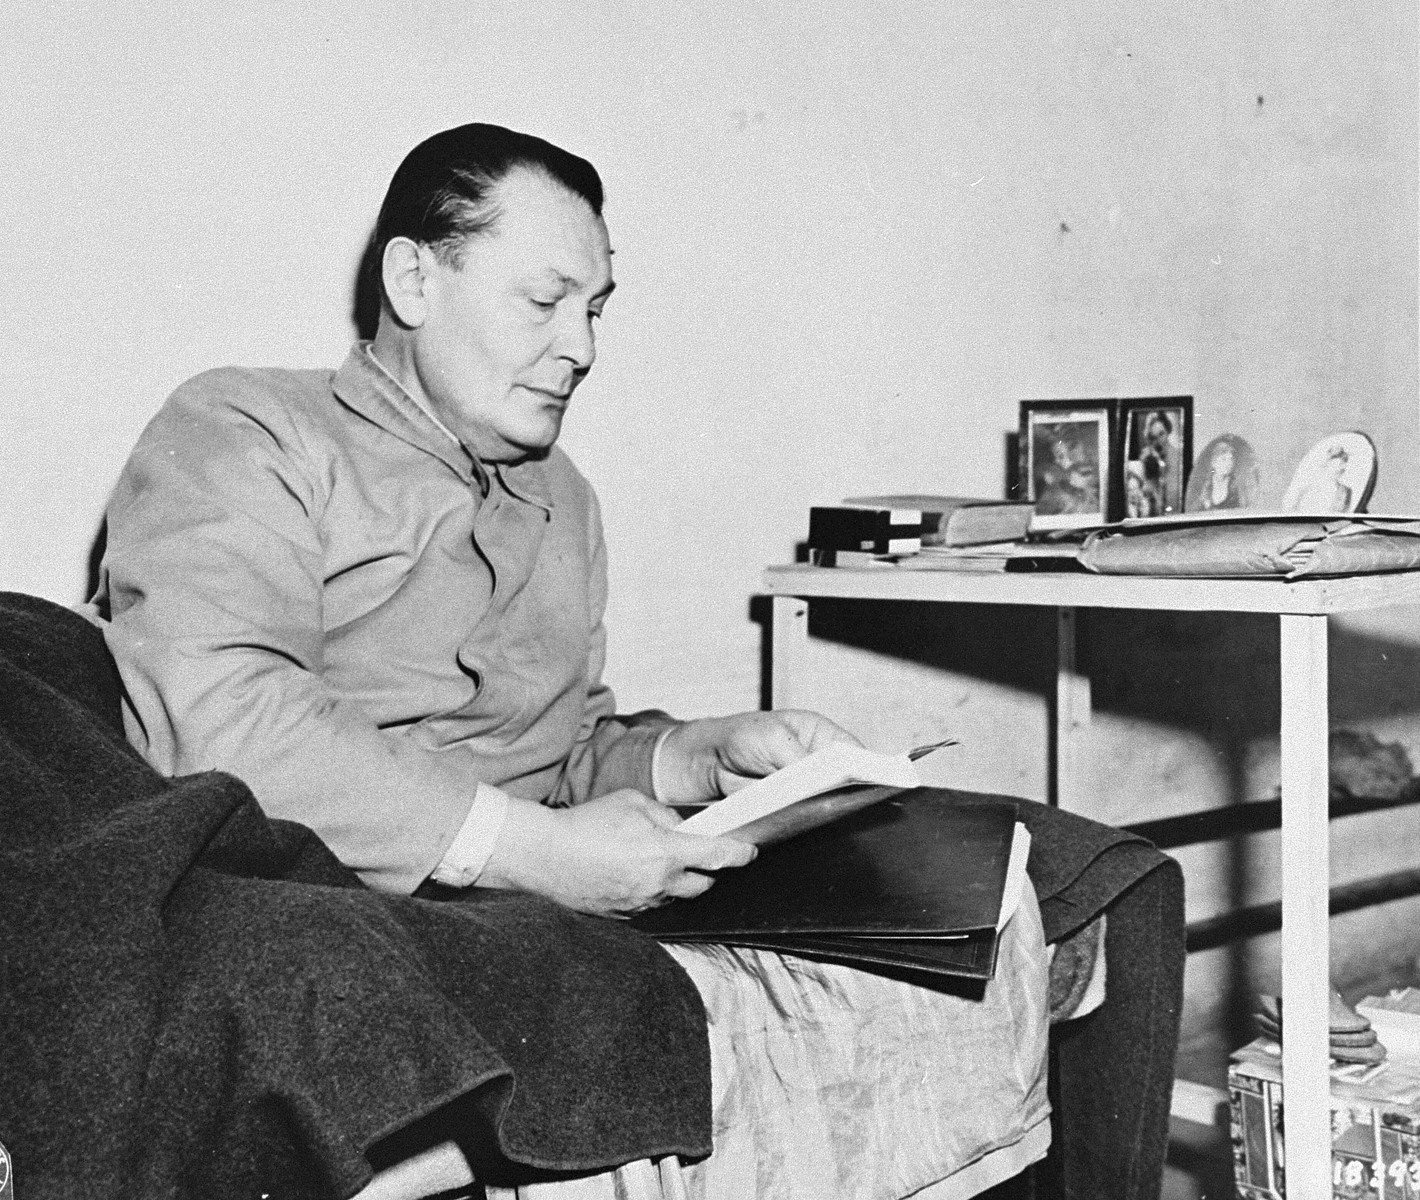 Defendant Herman Goering lies in his bunk in jail during the International Military Tribunal trial of war criminals at Nuremberg.  On his writing table are pictures of his family which he objected to having photographed.